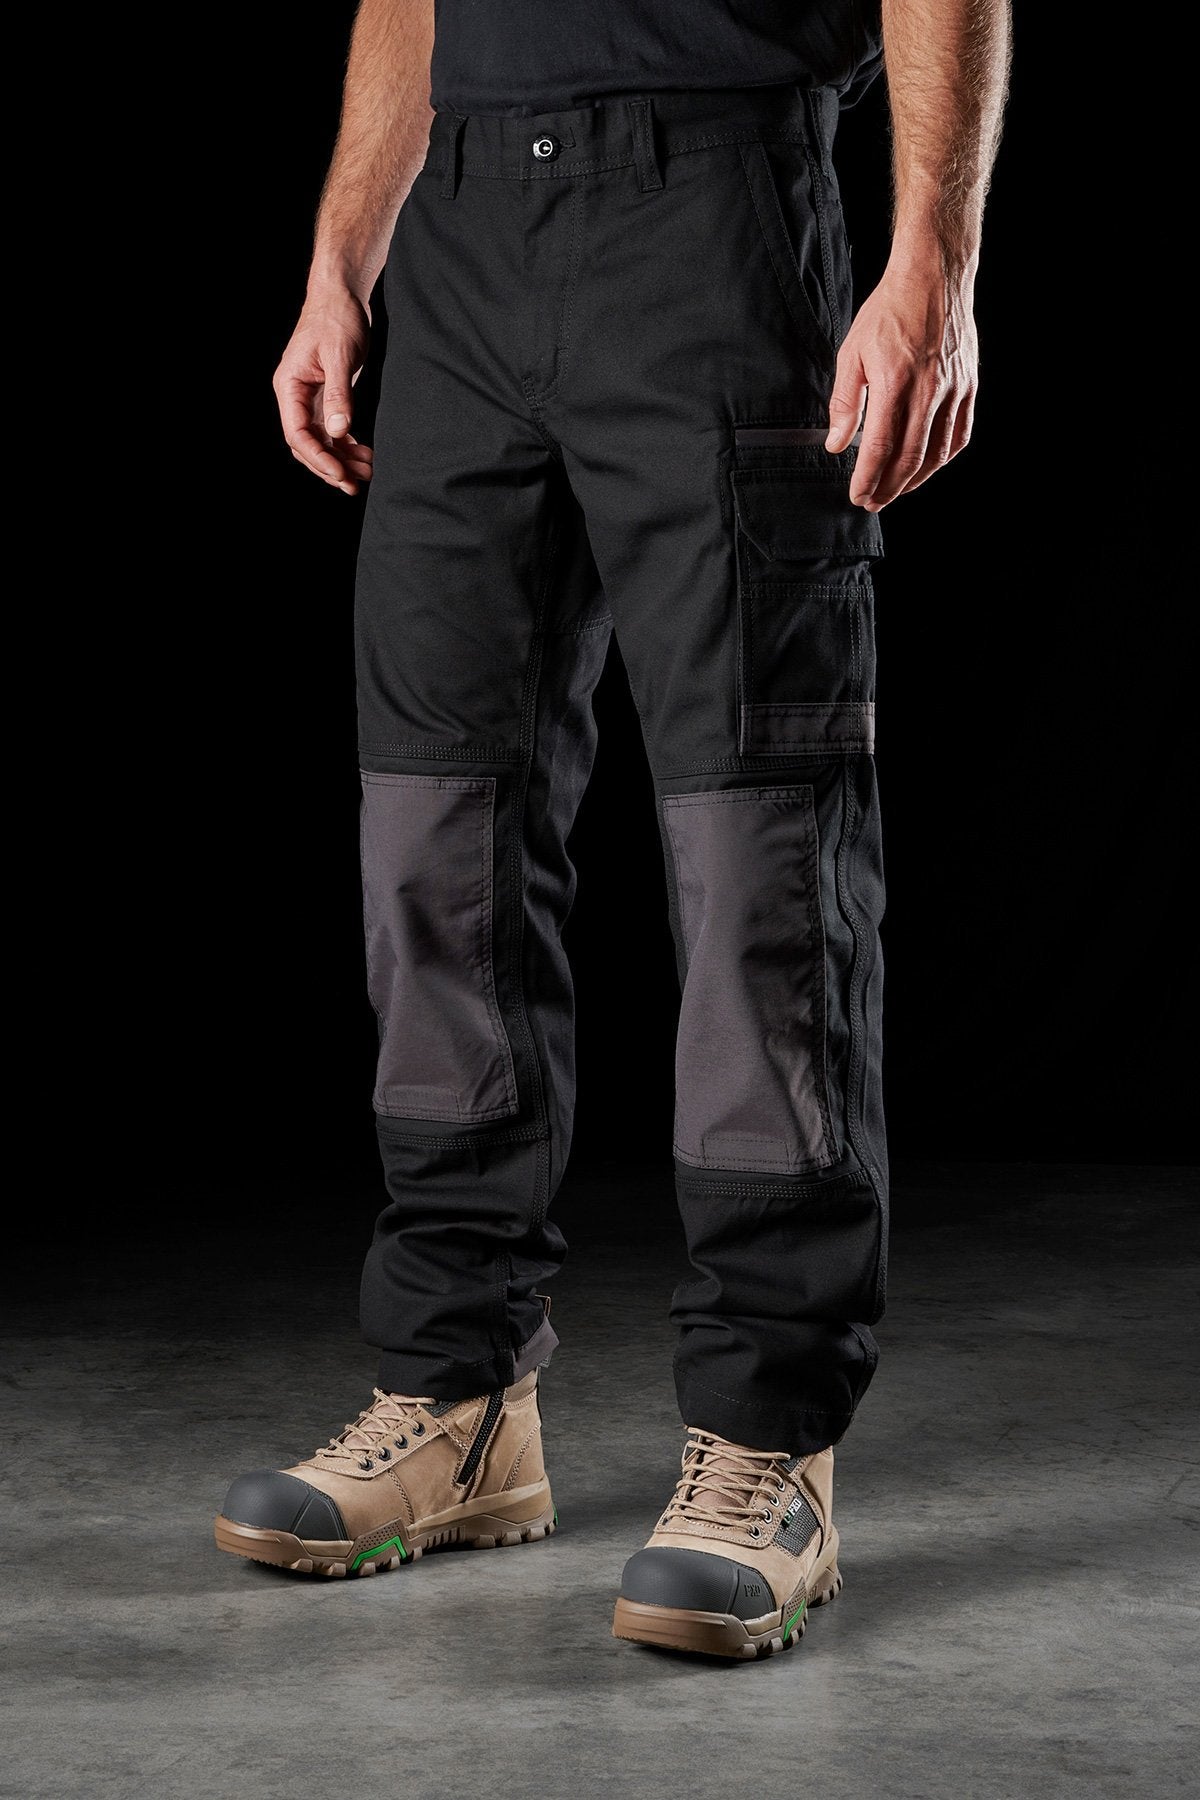 HELIKON-TEX OUTDOOR TACTICAL PANTS - BLACK – Hock Gift Shop | Army Online  Store in Singapore